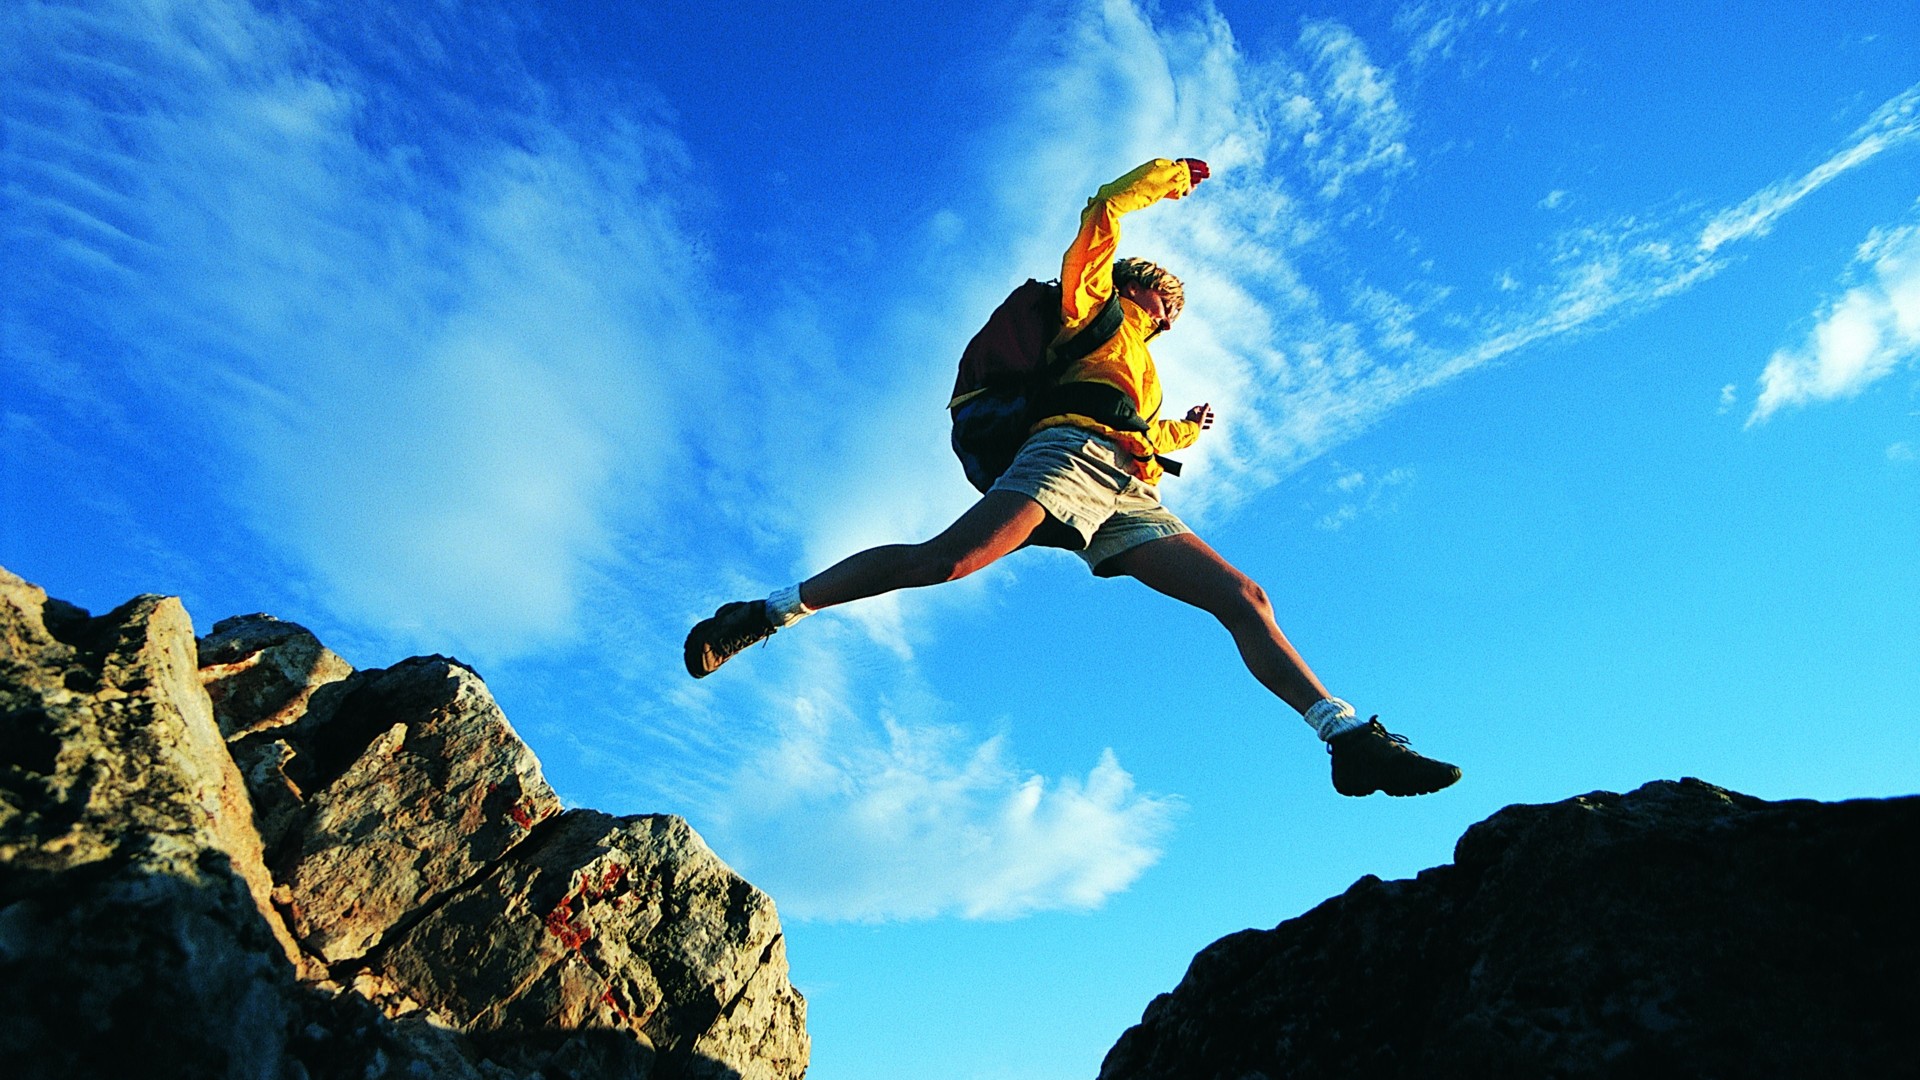 sports wallpapers hd,sky,jumping,extreme sport,sports,happy